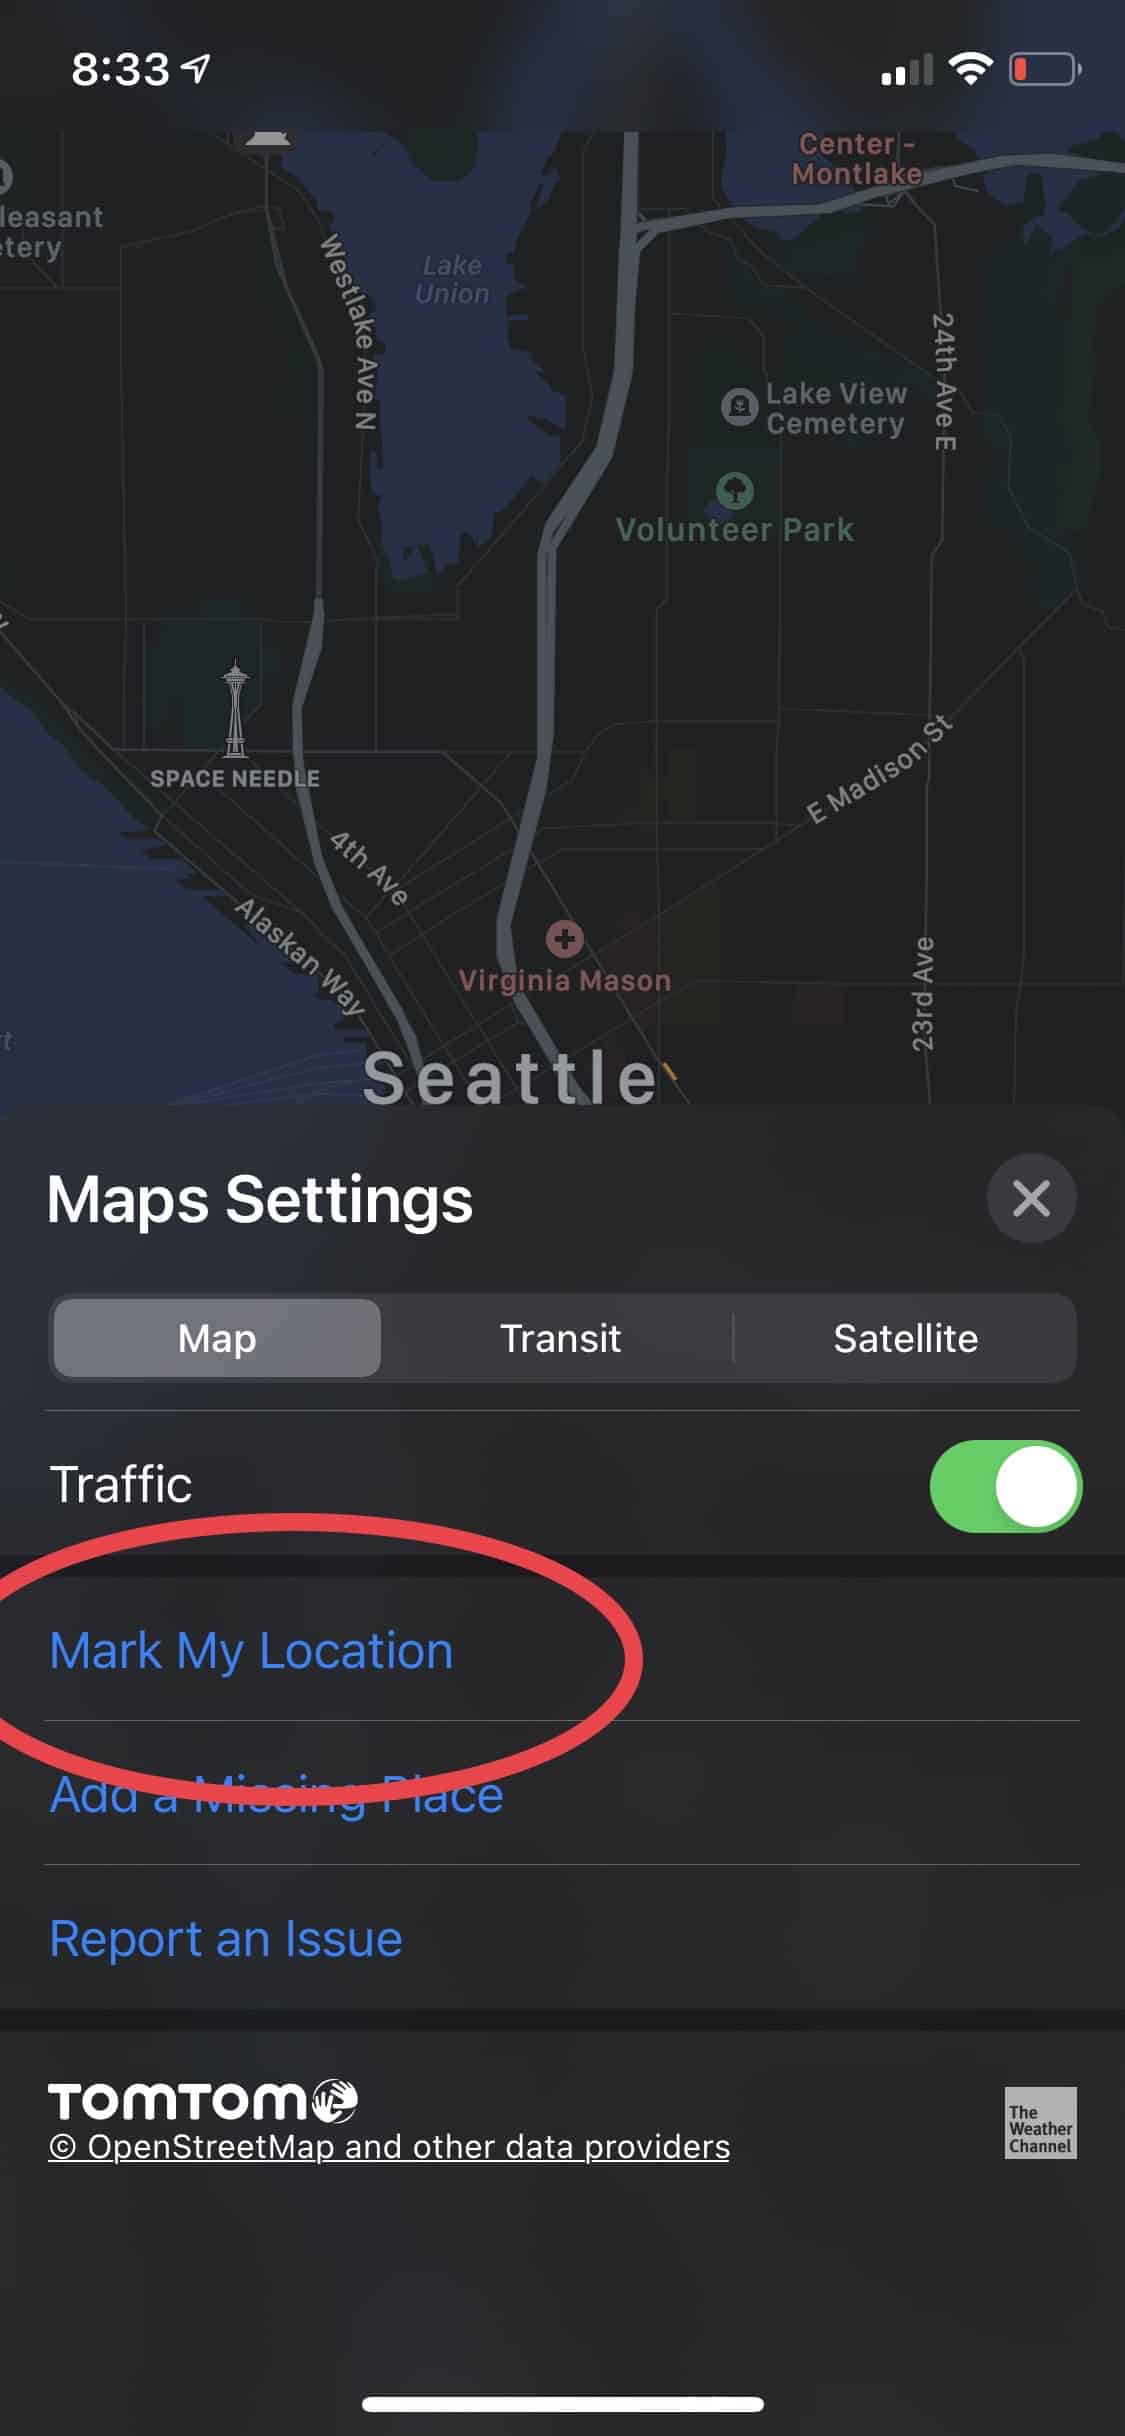 Mark your location - Apple Maps